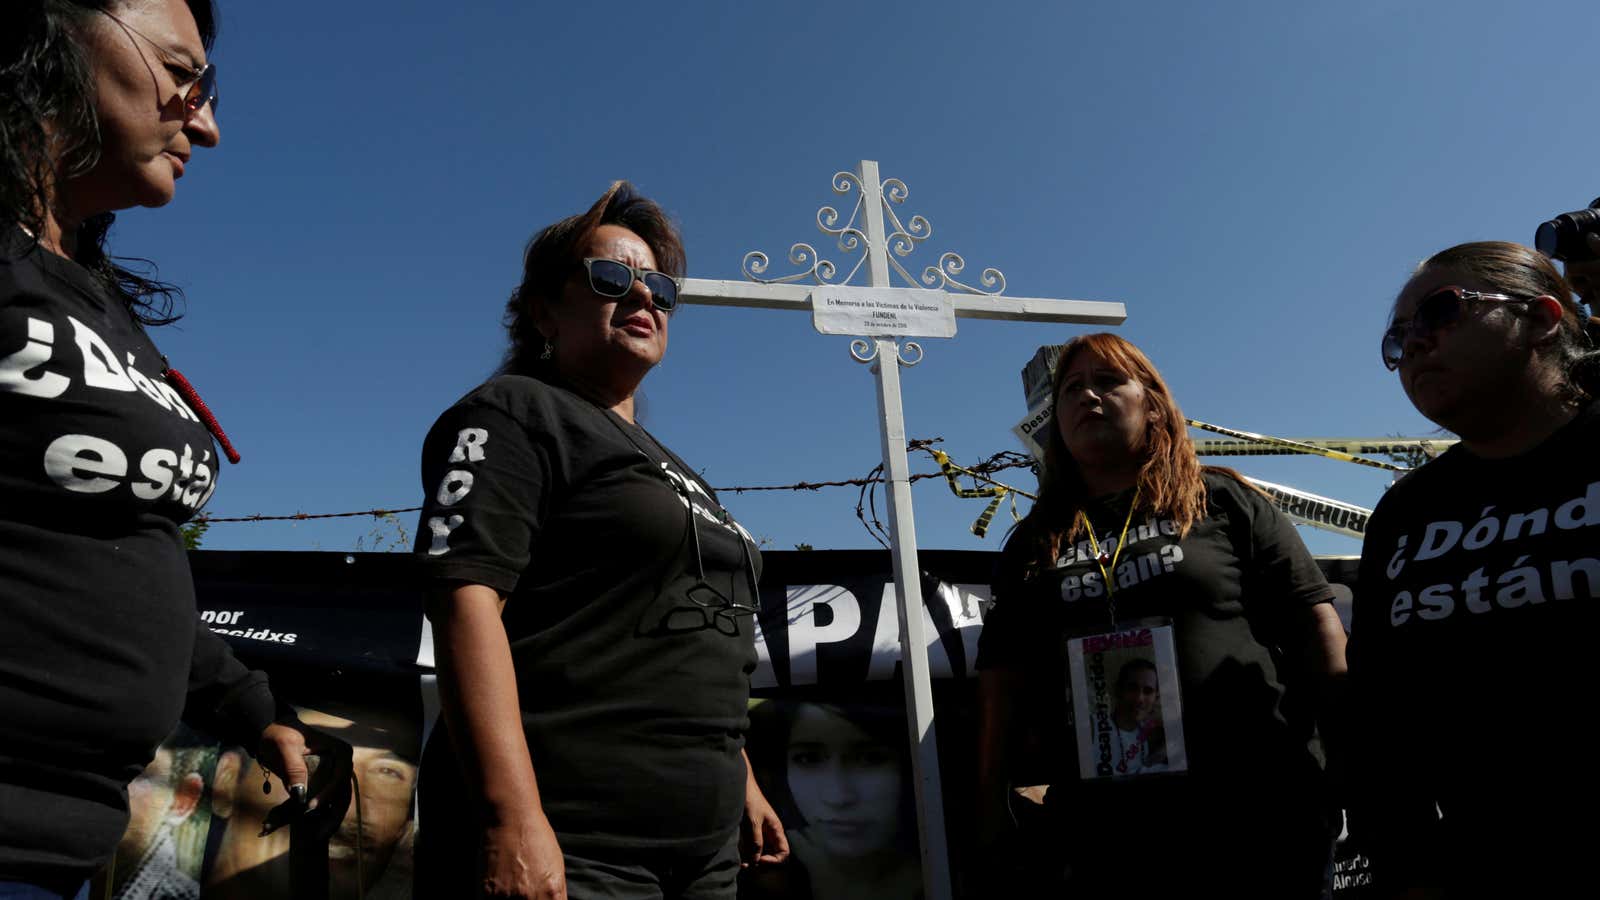 A cross in memory of the missing persons at the site where several bodies were found in mass graves in the municipality of Salinas Victoria, Nuevo Leon, Mexico